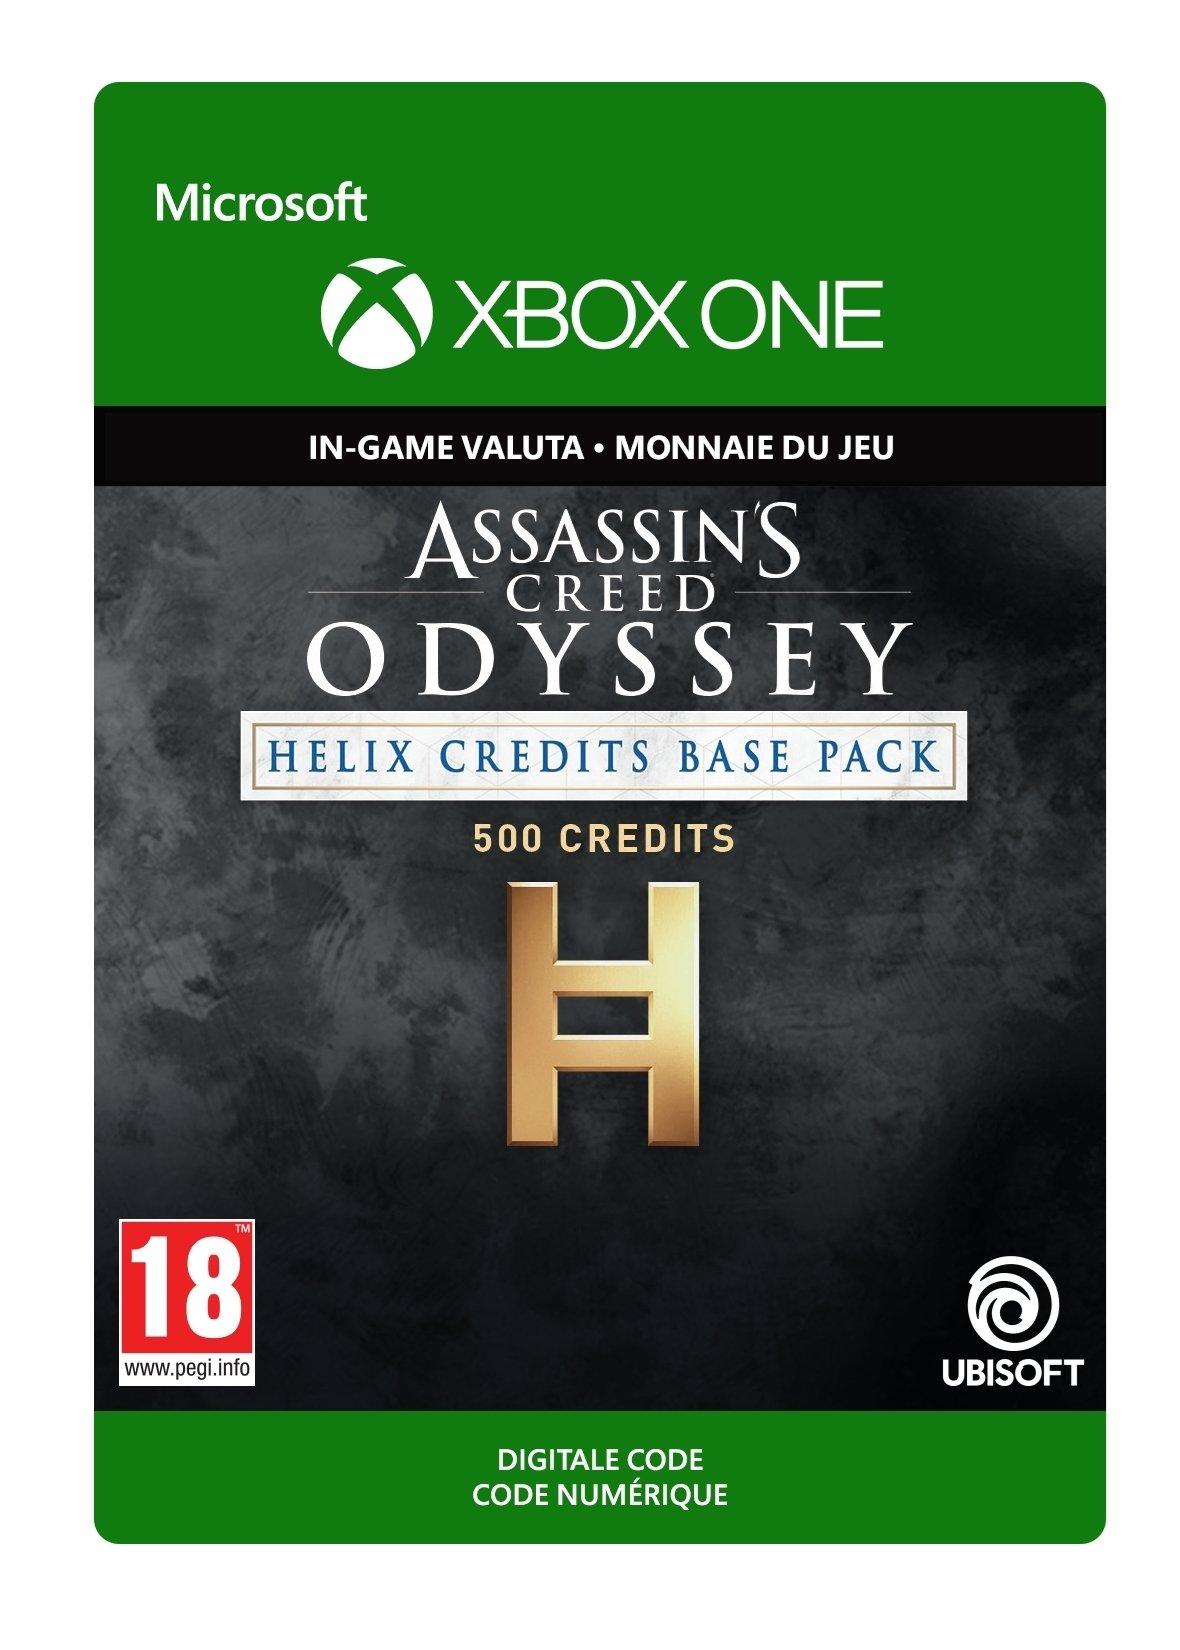 Assassin's Creed Odyssey: Helix Credits Base Pack - Xbox One - Consumable | 7F6-00208 (57ad089a-1d2e-1346-b0a5-d97dfcc43387)